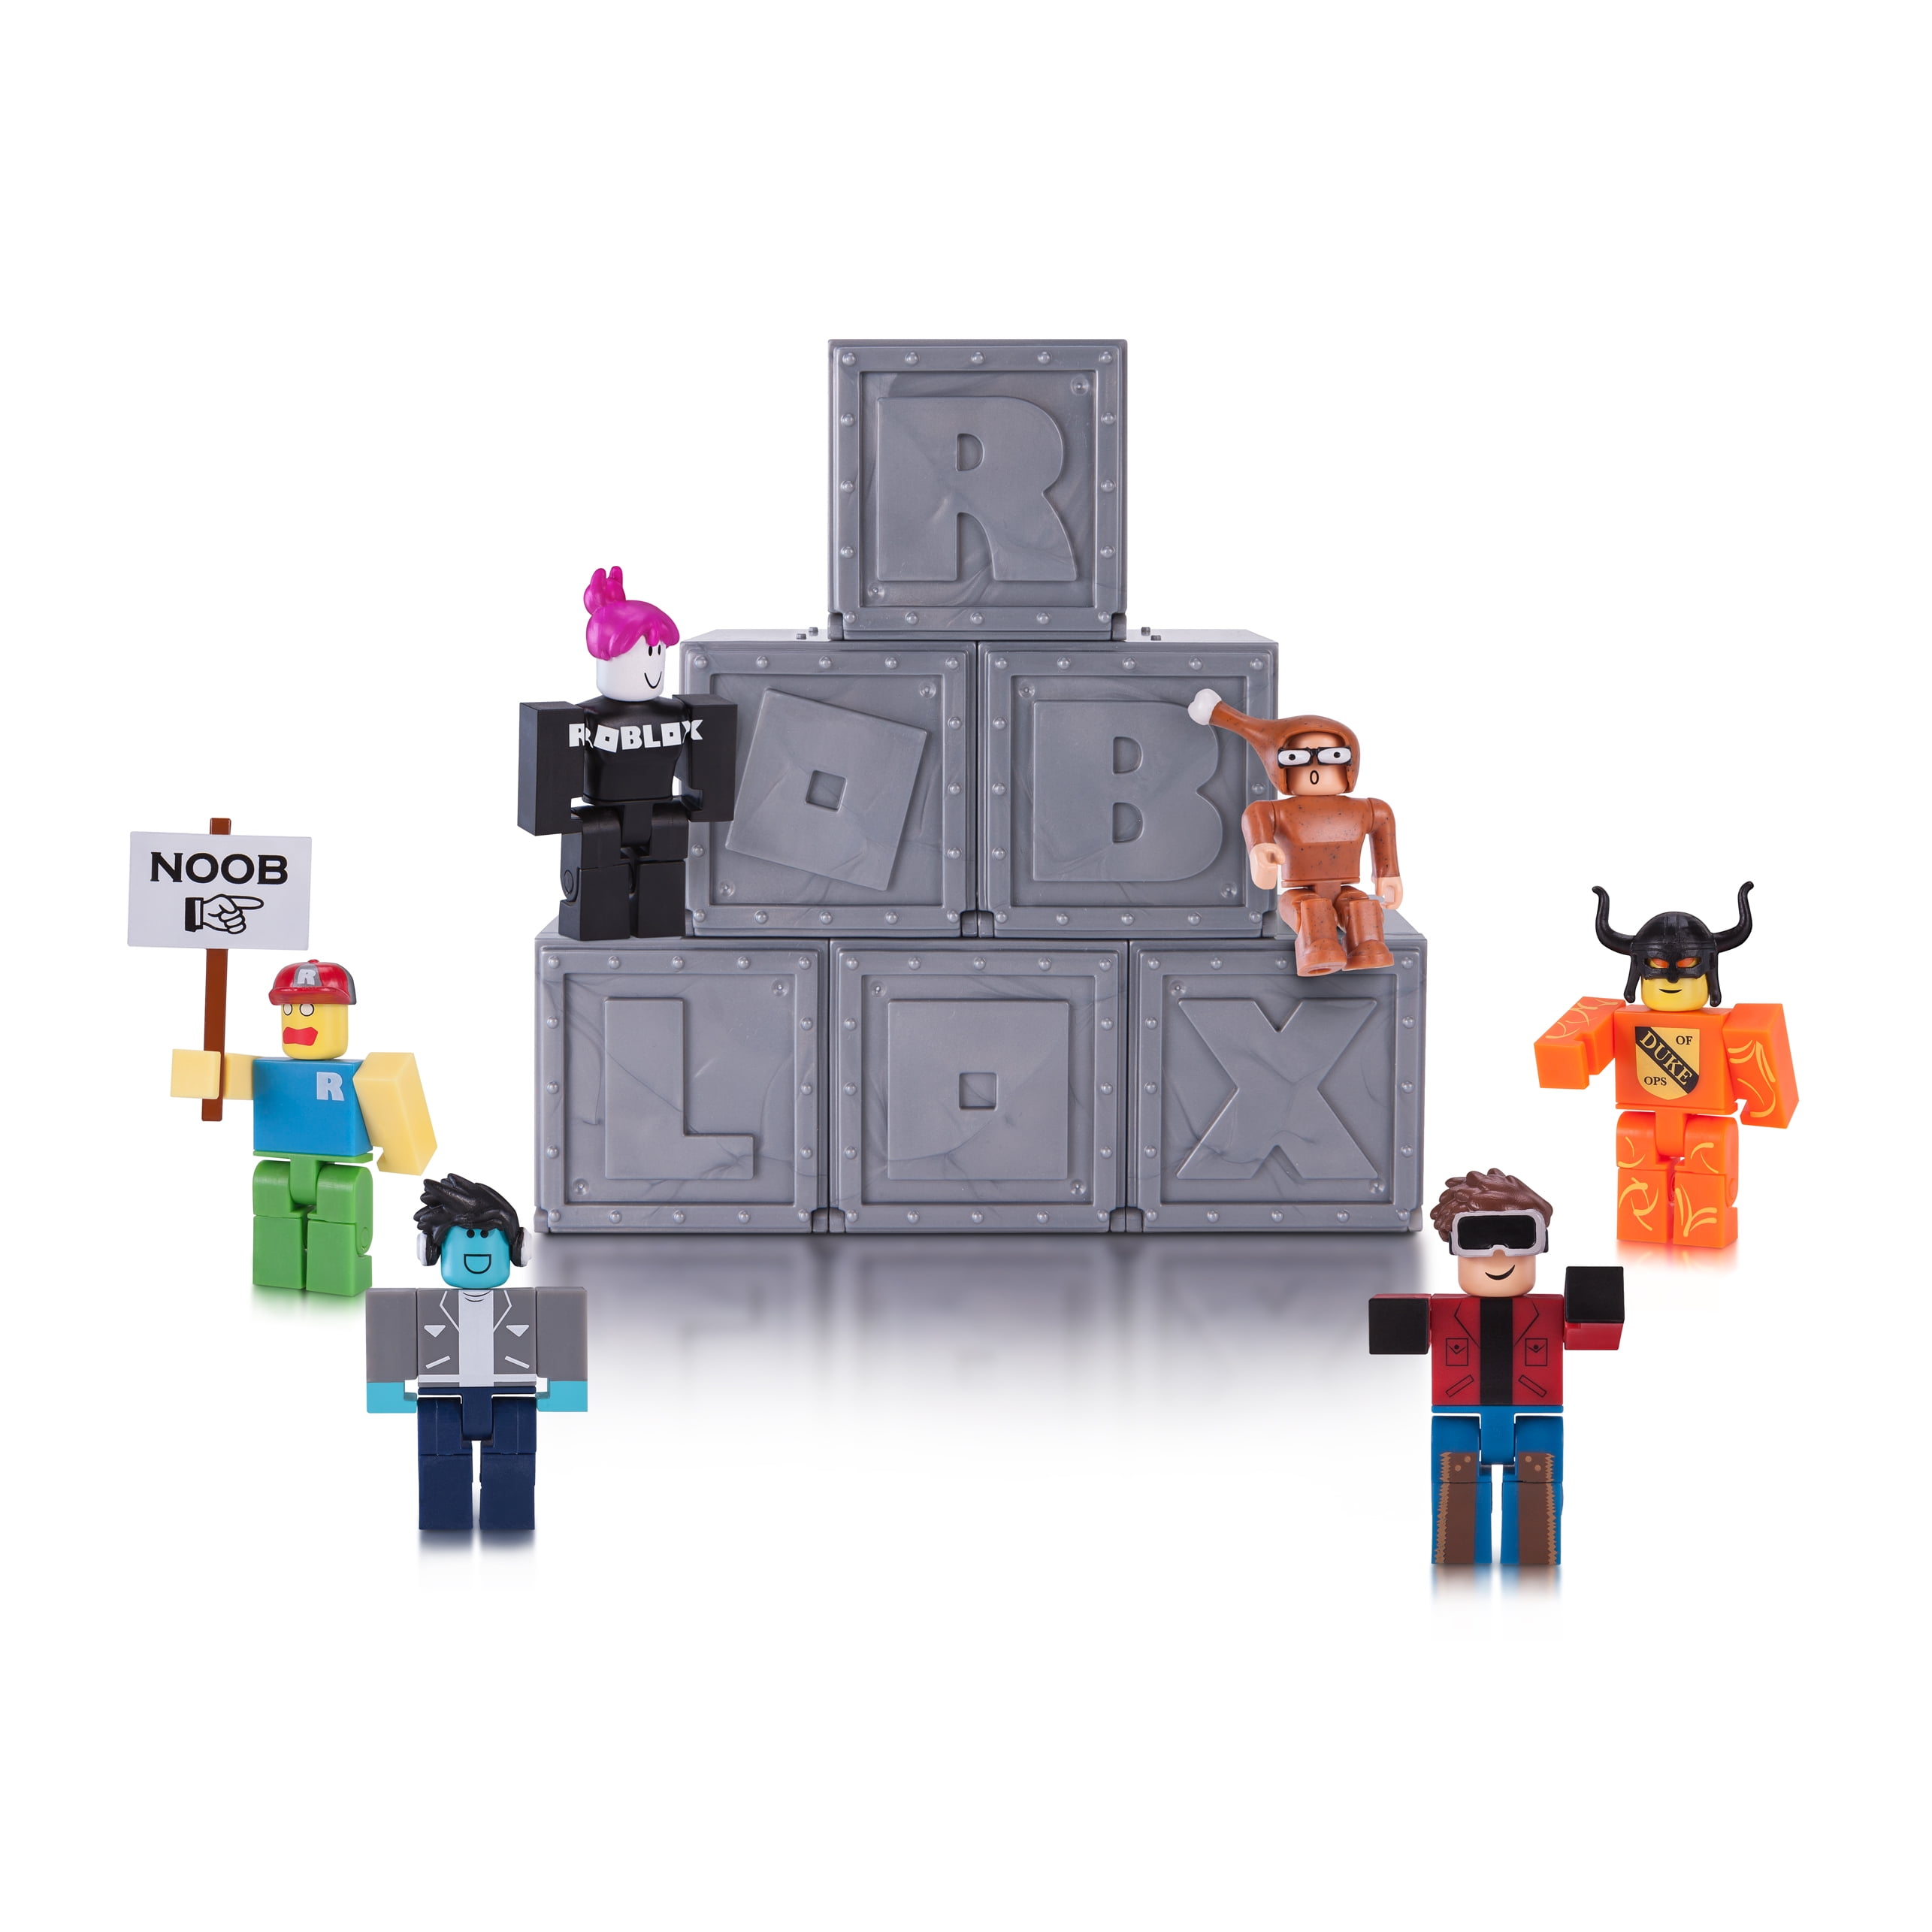 Roblox Action Collection Series 1 Mystery Figure Includes 1 Figure Exclusive Virtual Item Walmart Com Walmart Com - roblox action collection series 3 mystery figure includes 1 figure exclusive virtual item walmart com walmart com